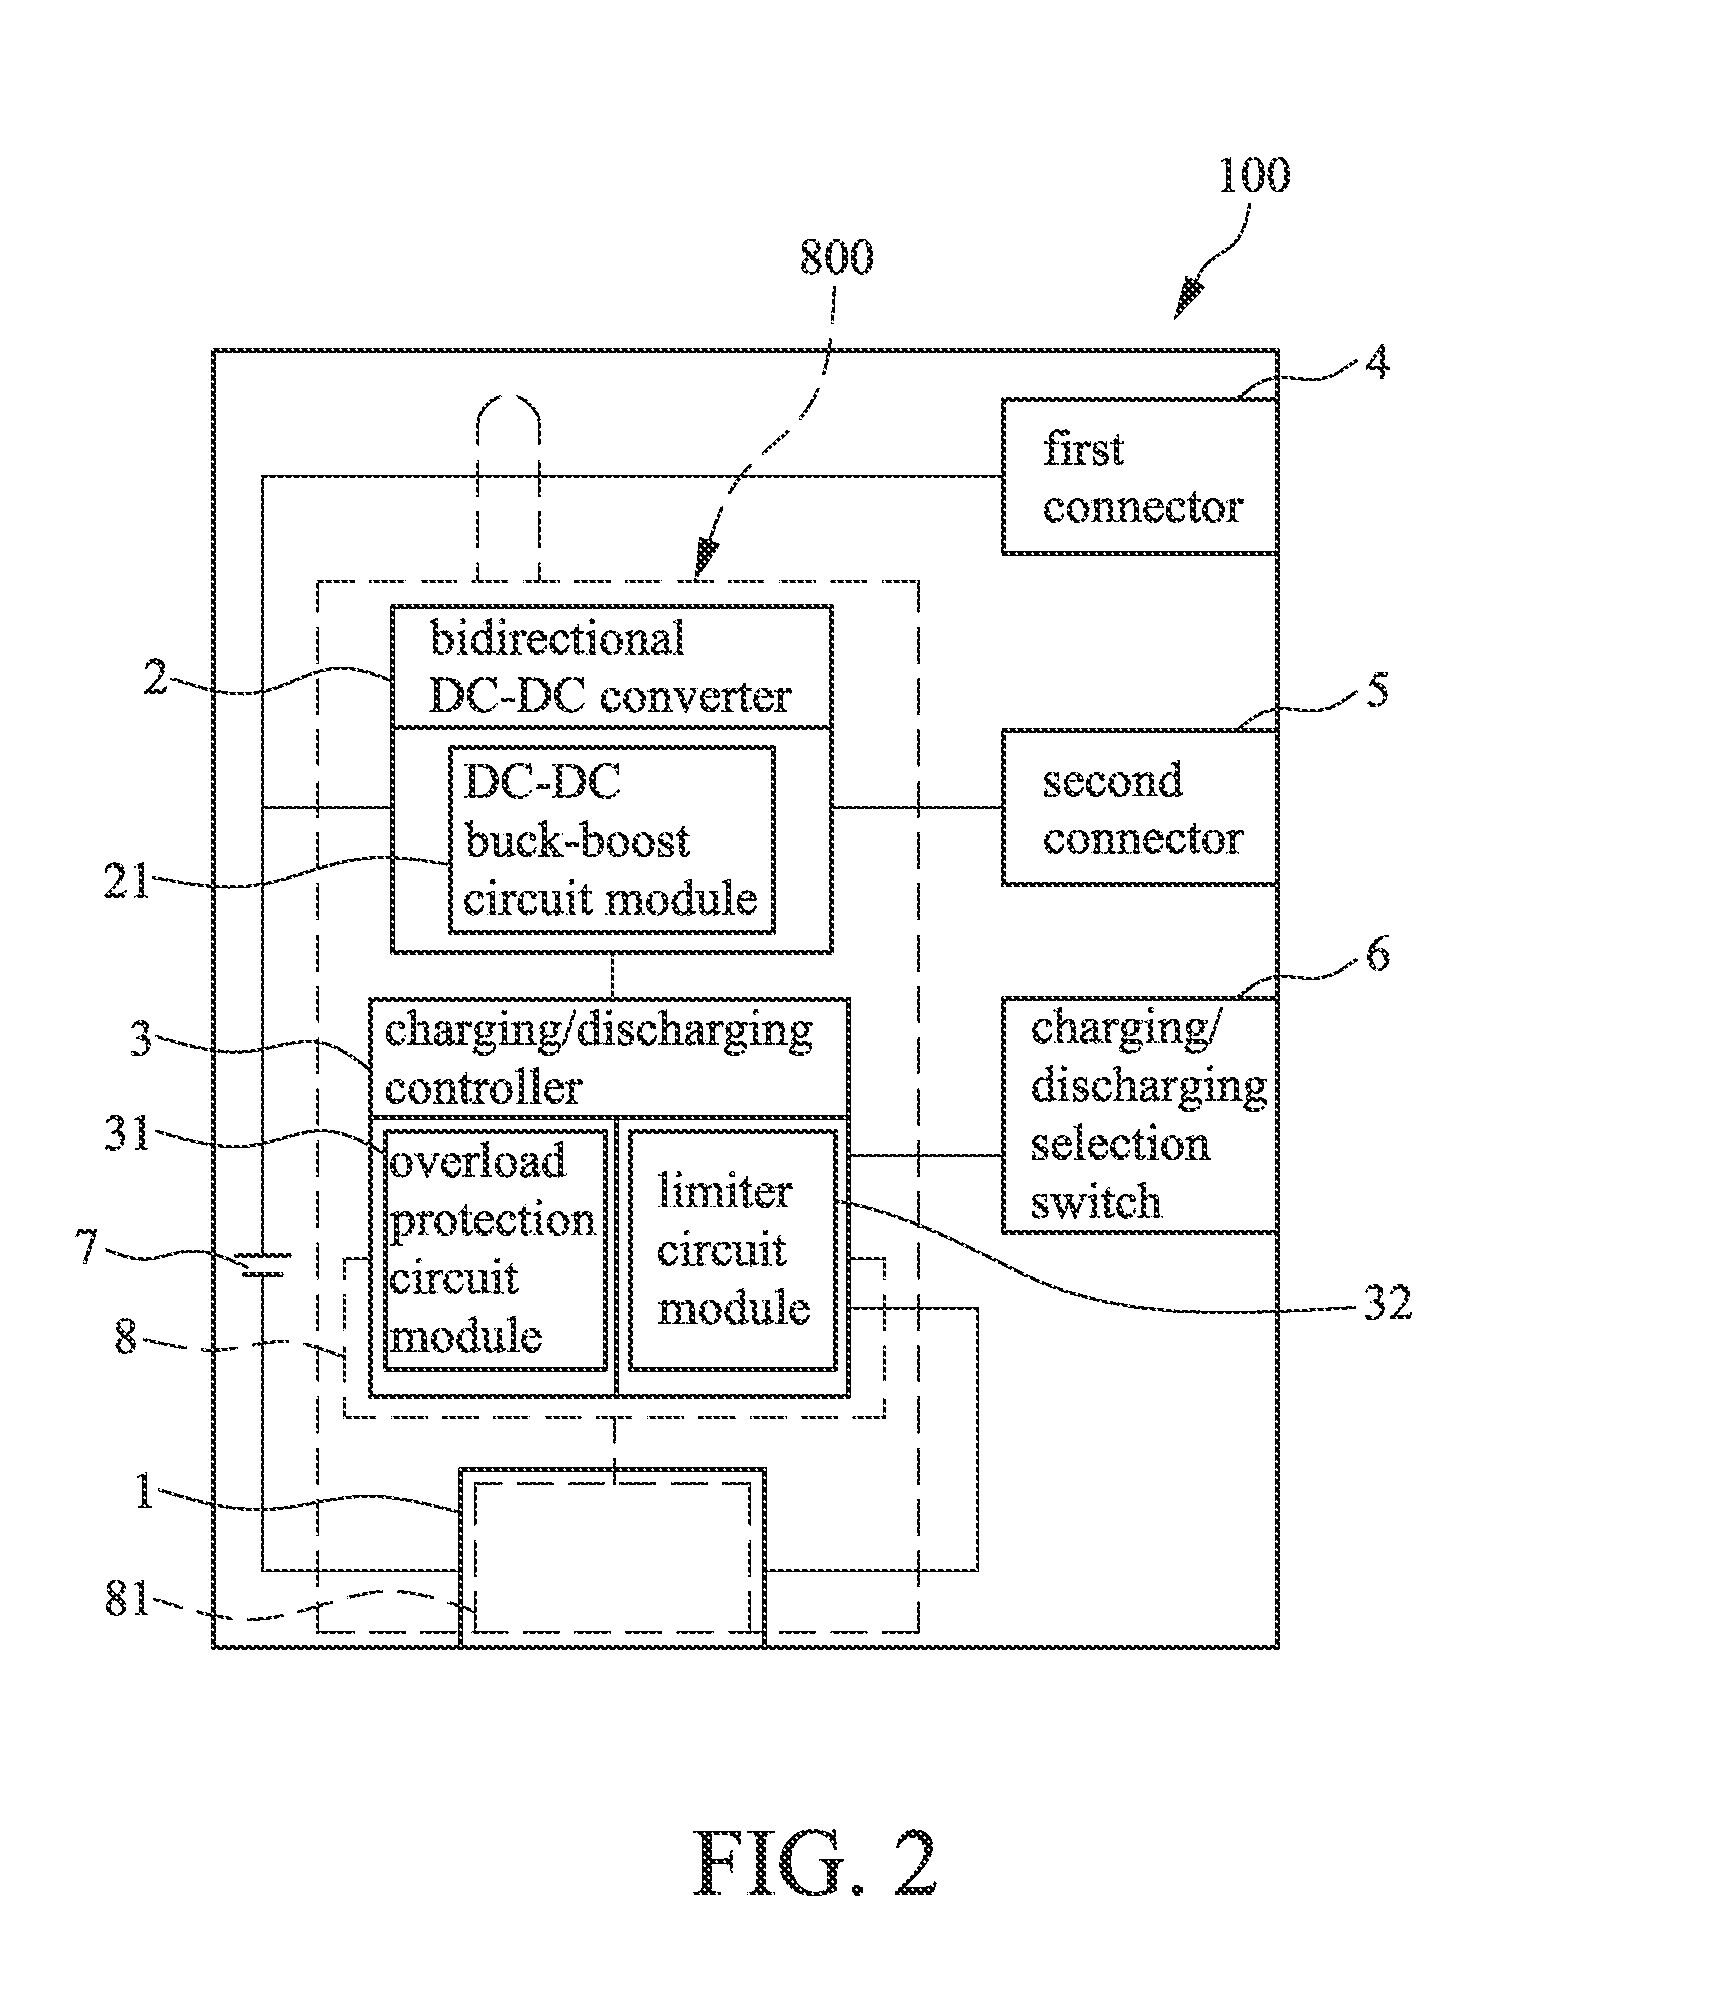 Protection cover allowing handheld device to reversely discharge